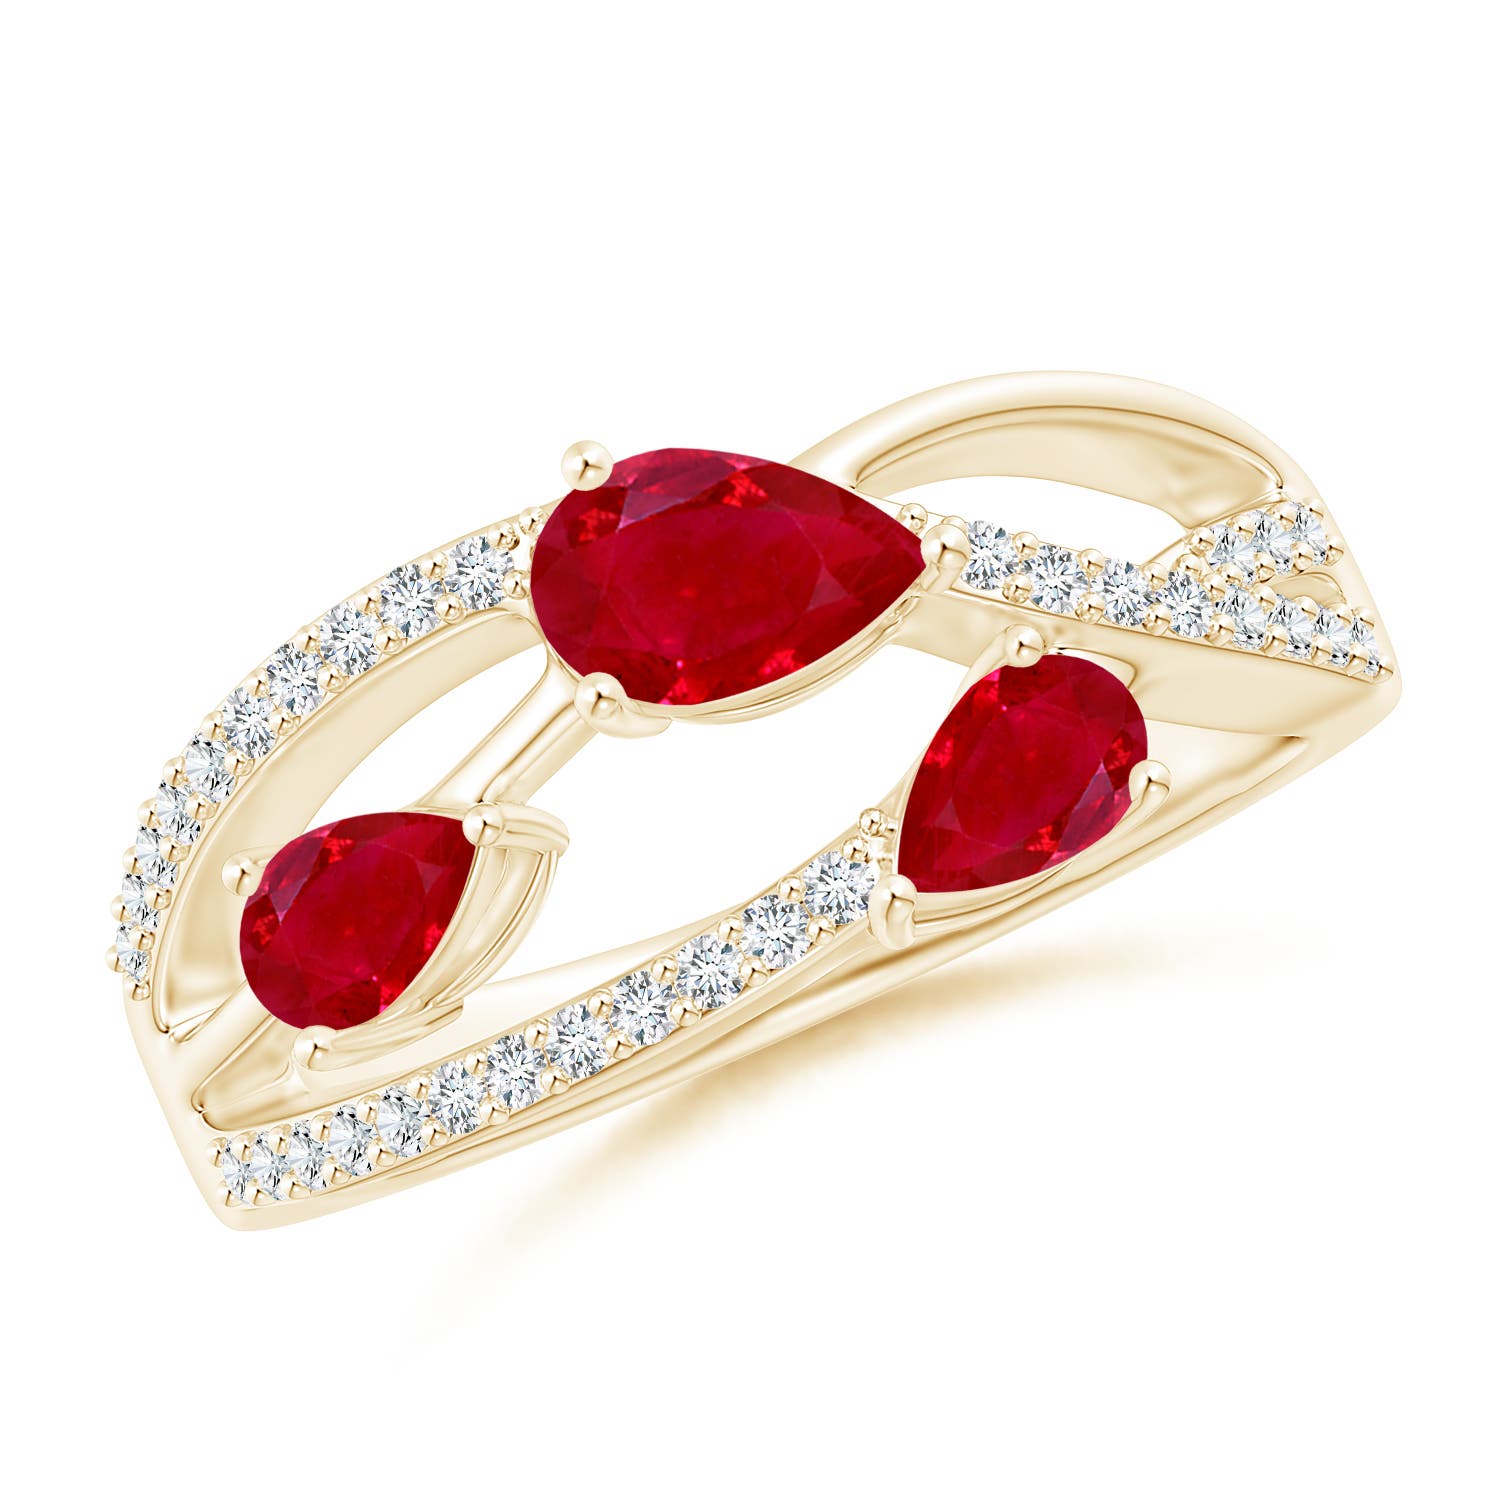 AAA - Ruby / 1.03 CT / 14 KT Yellow Gold